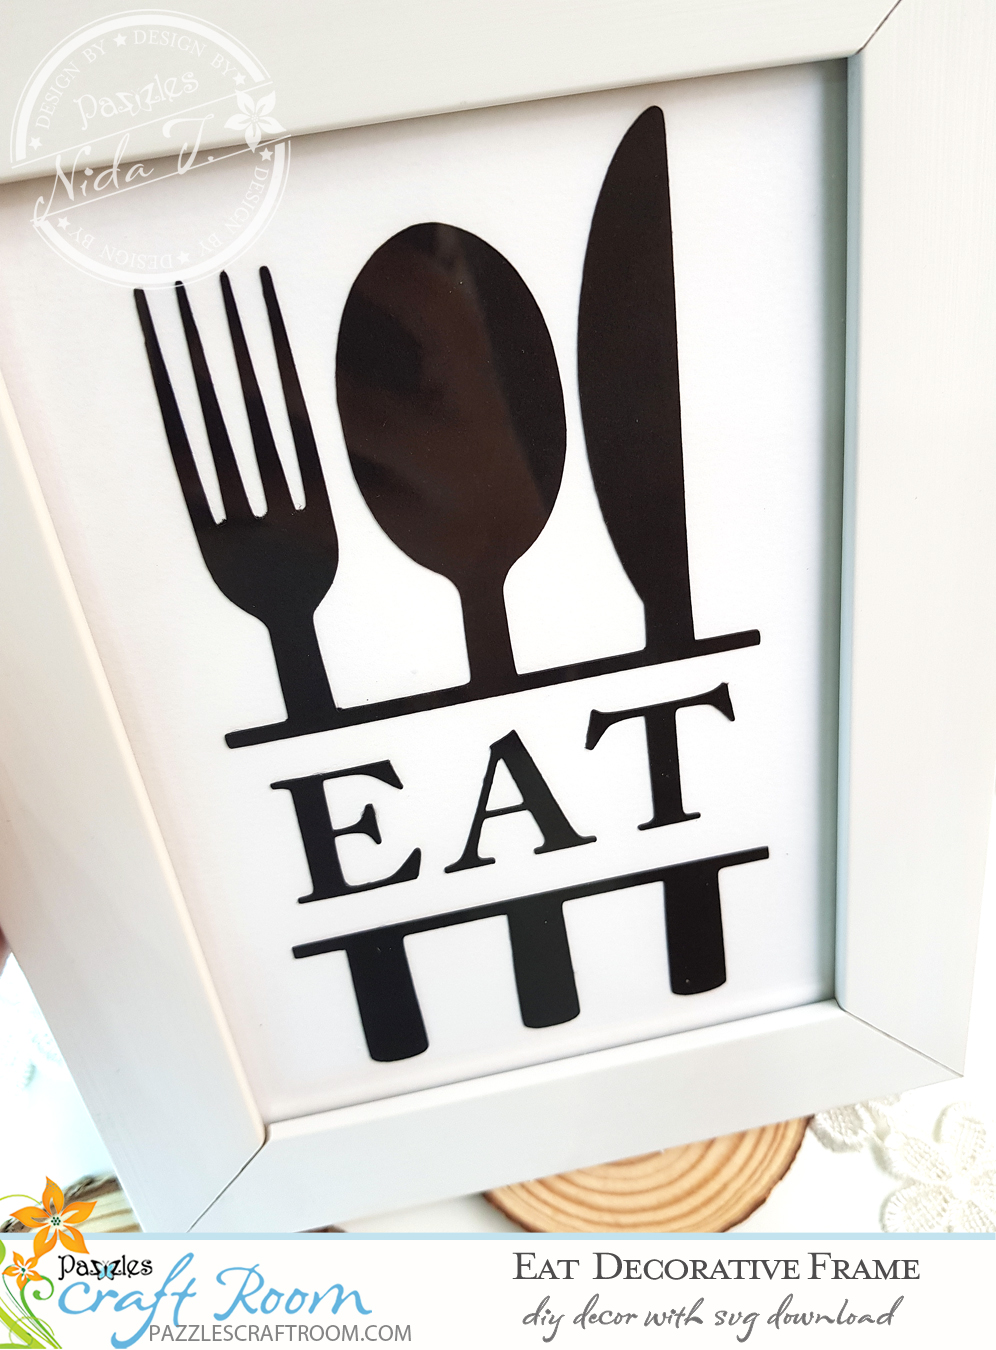 Pazzles DIY Eat Decorative Frame with instant SVG download. Compatible with all major electronic cutters including Pazzles Inspiration, Cricut, and Silhouette Cameo. Design by Nida Tanweer.